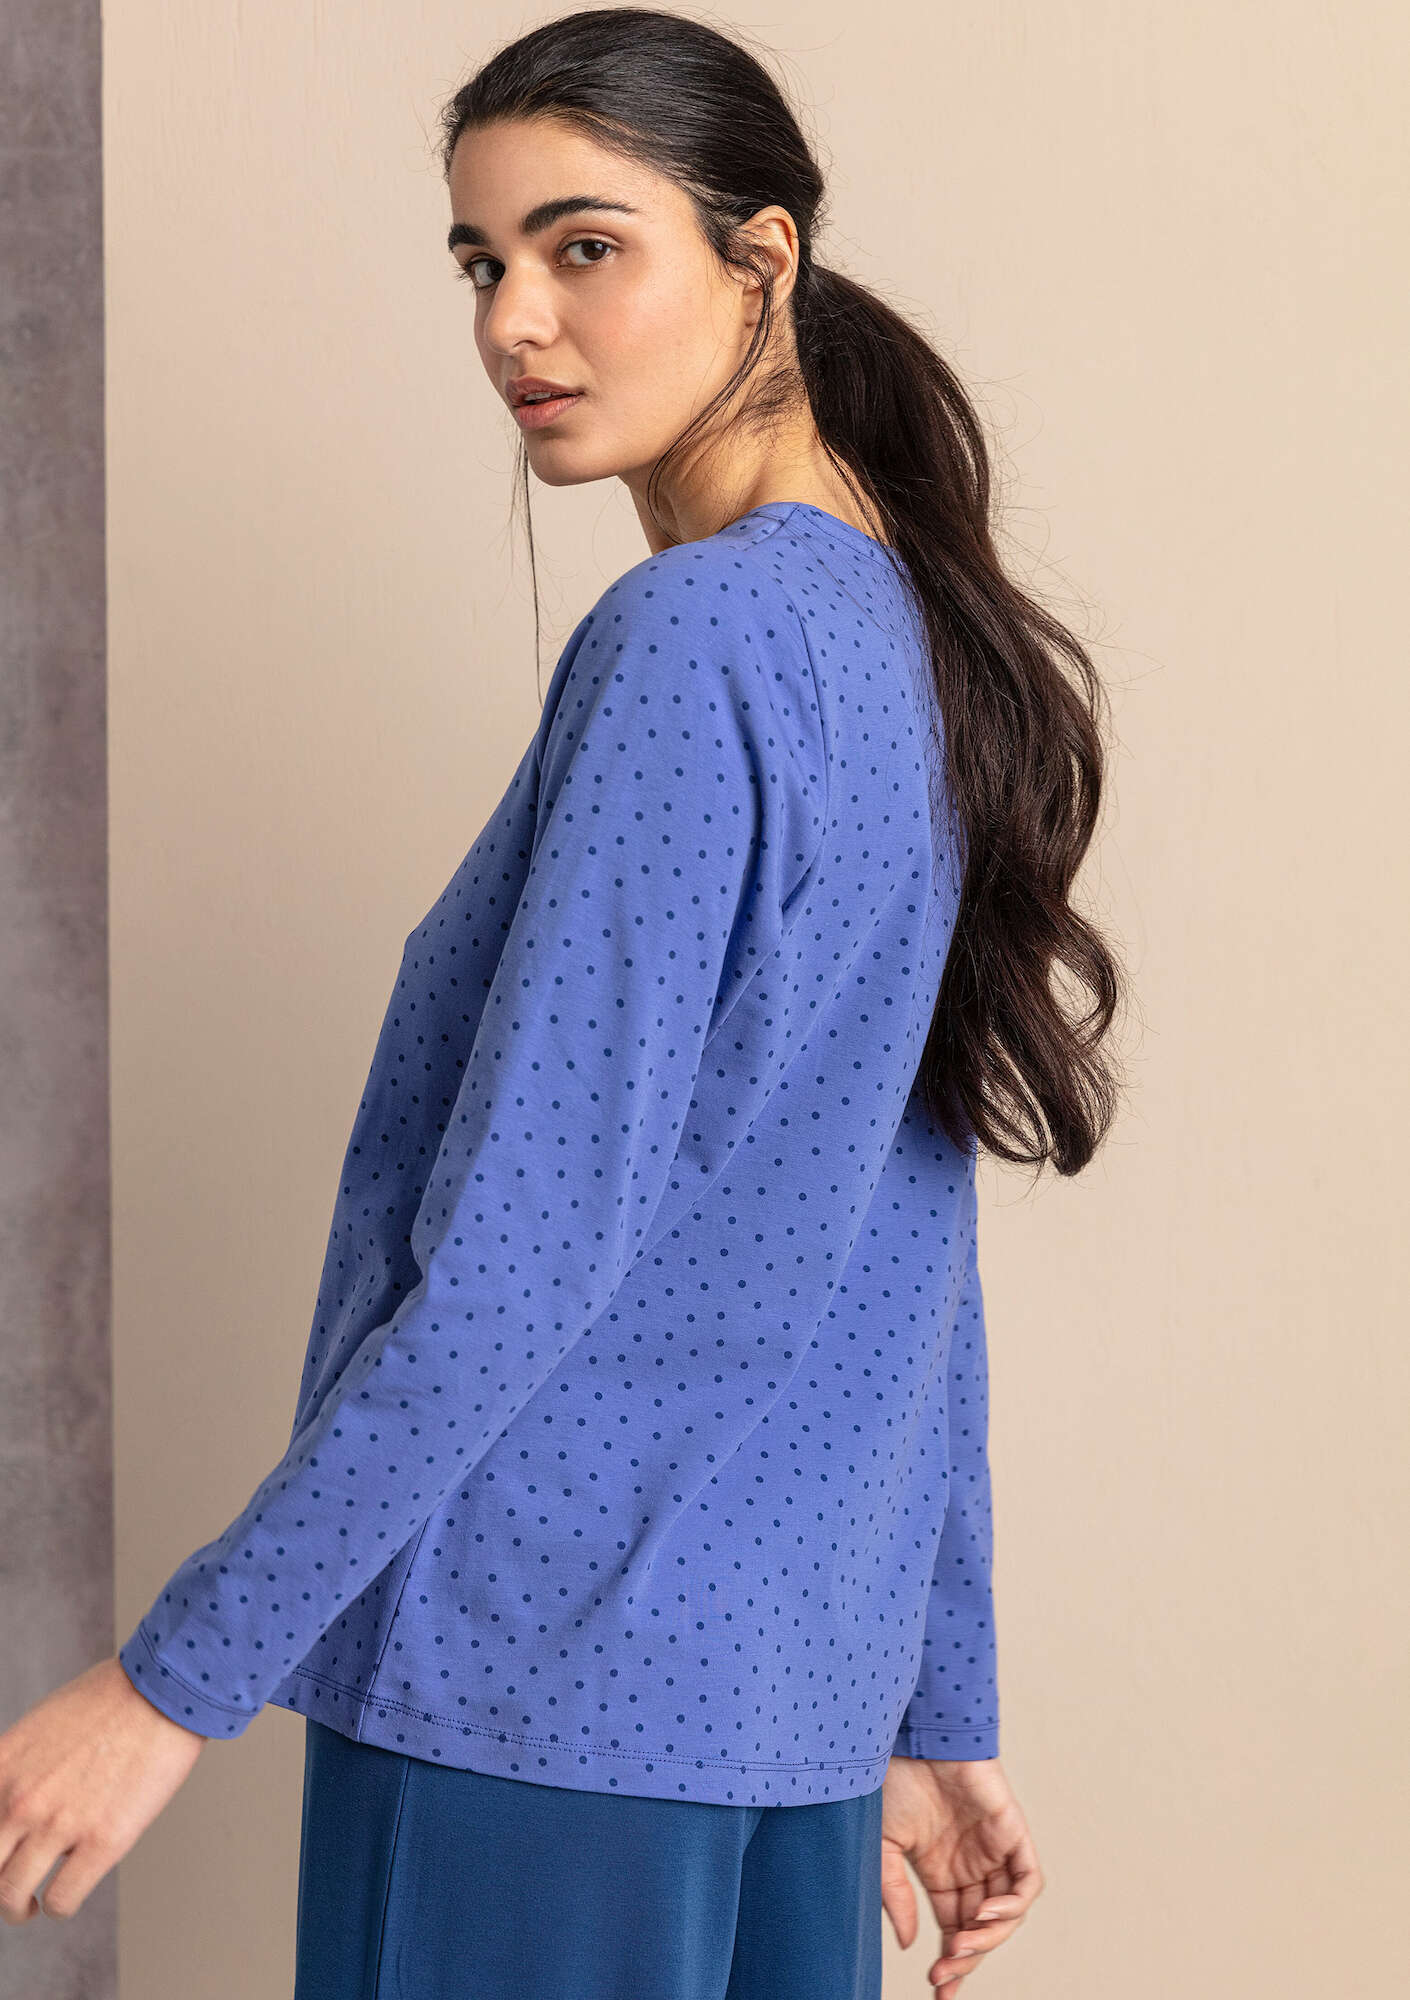 “Pytte” jersey top in organic cotton/elastane sky blue/patterned thumbnail